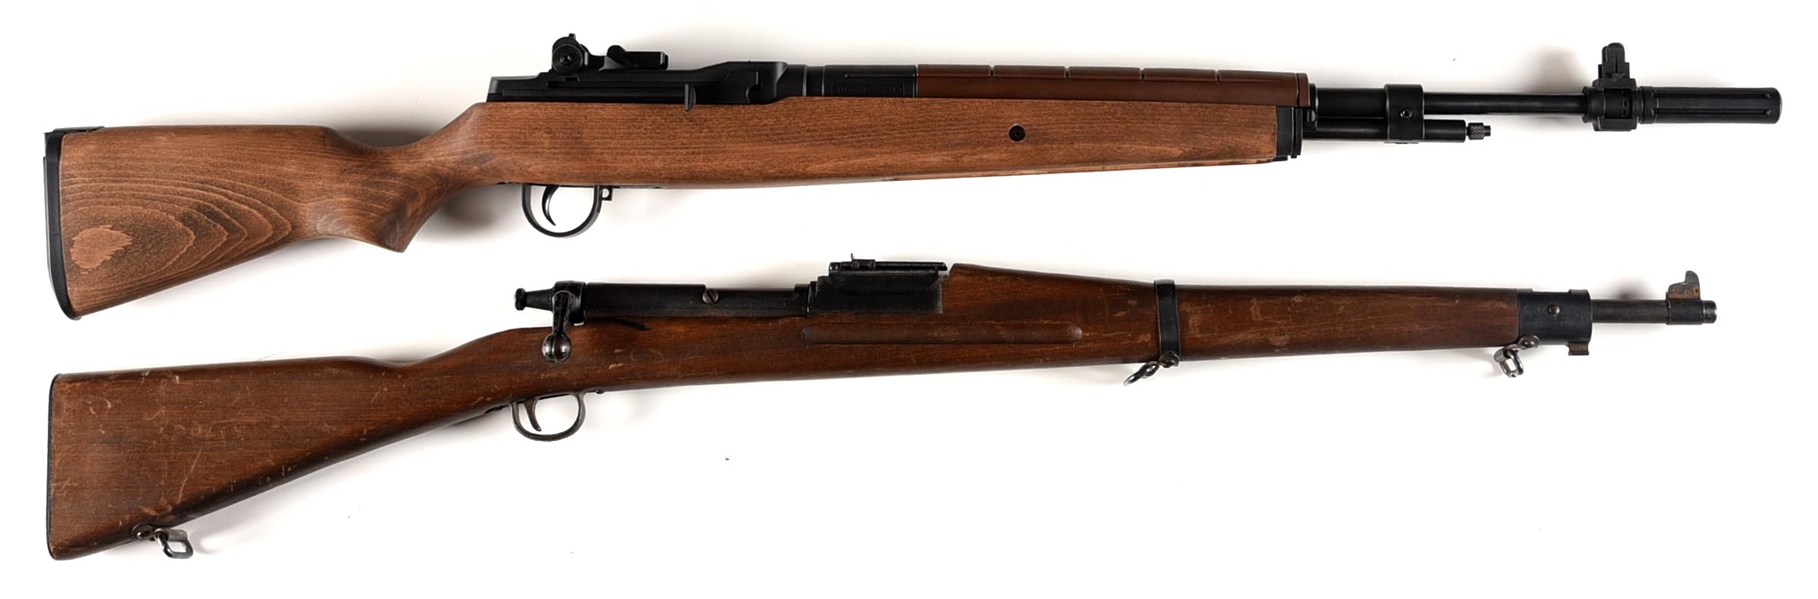 LOT OF 2: SPRINGFIELD M1A PELLET RIFLE AND M1903 BOLT ACTION TRAINER.